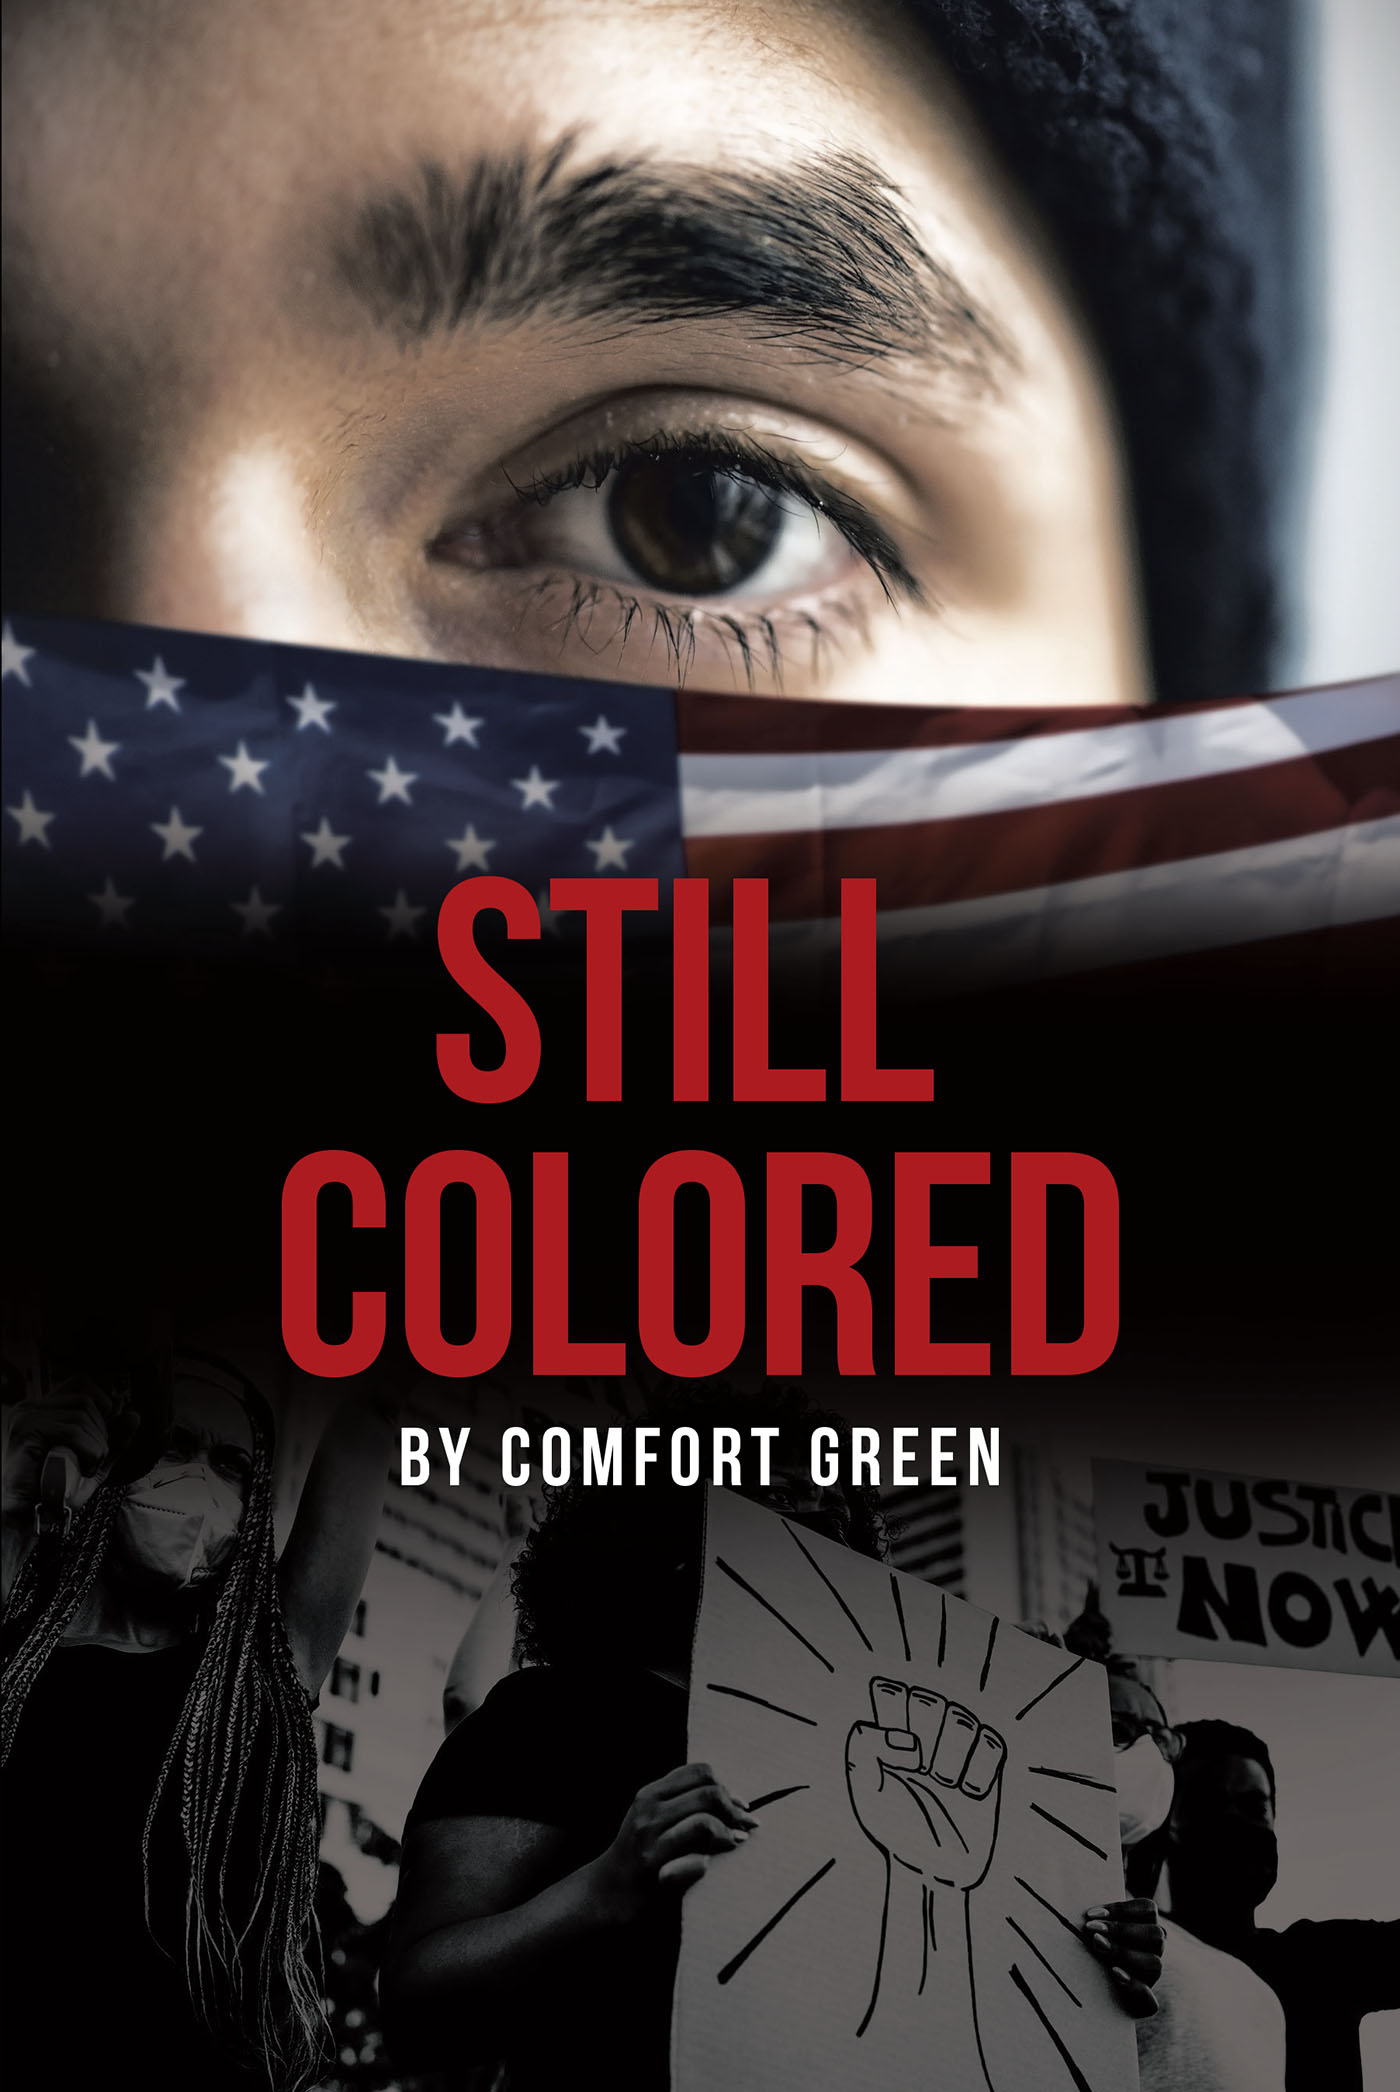 Author Comfort Green’s Book, "Still Colored," is a Stirring Immigrant Story Following the Author’s Journey from West Africa to the Challenges of Life in the United States